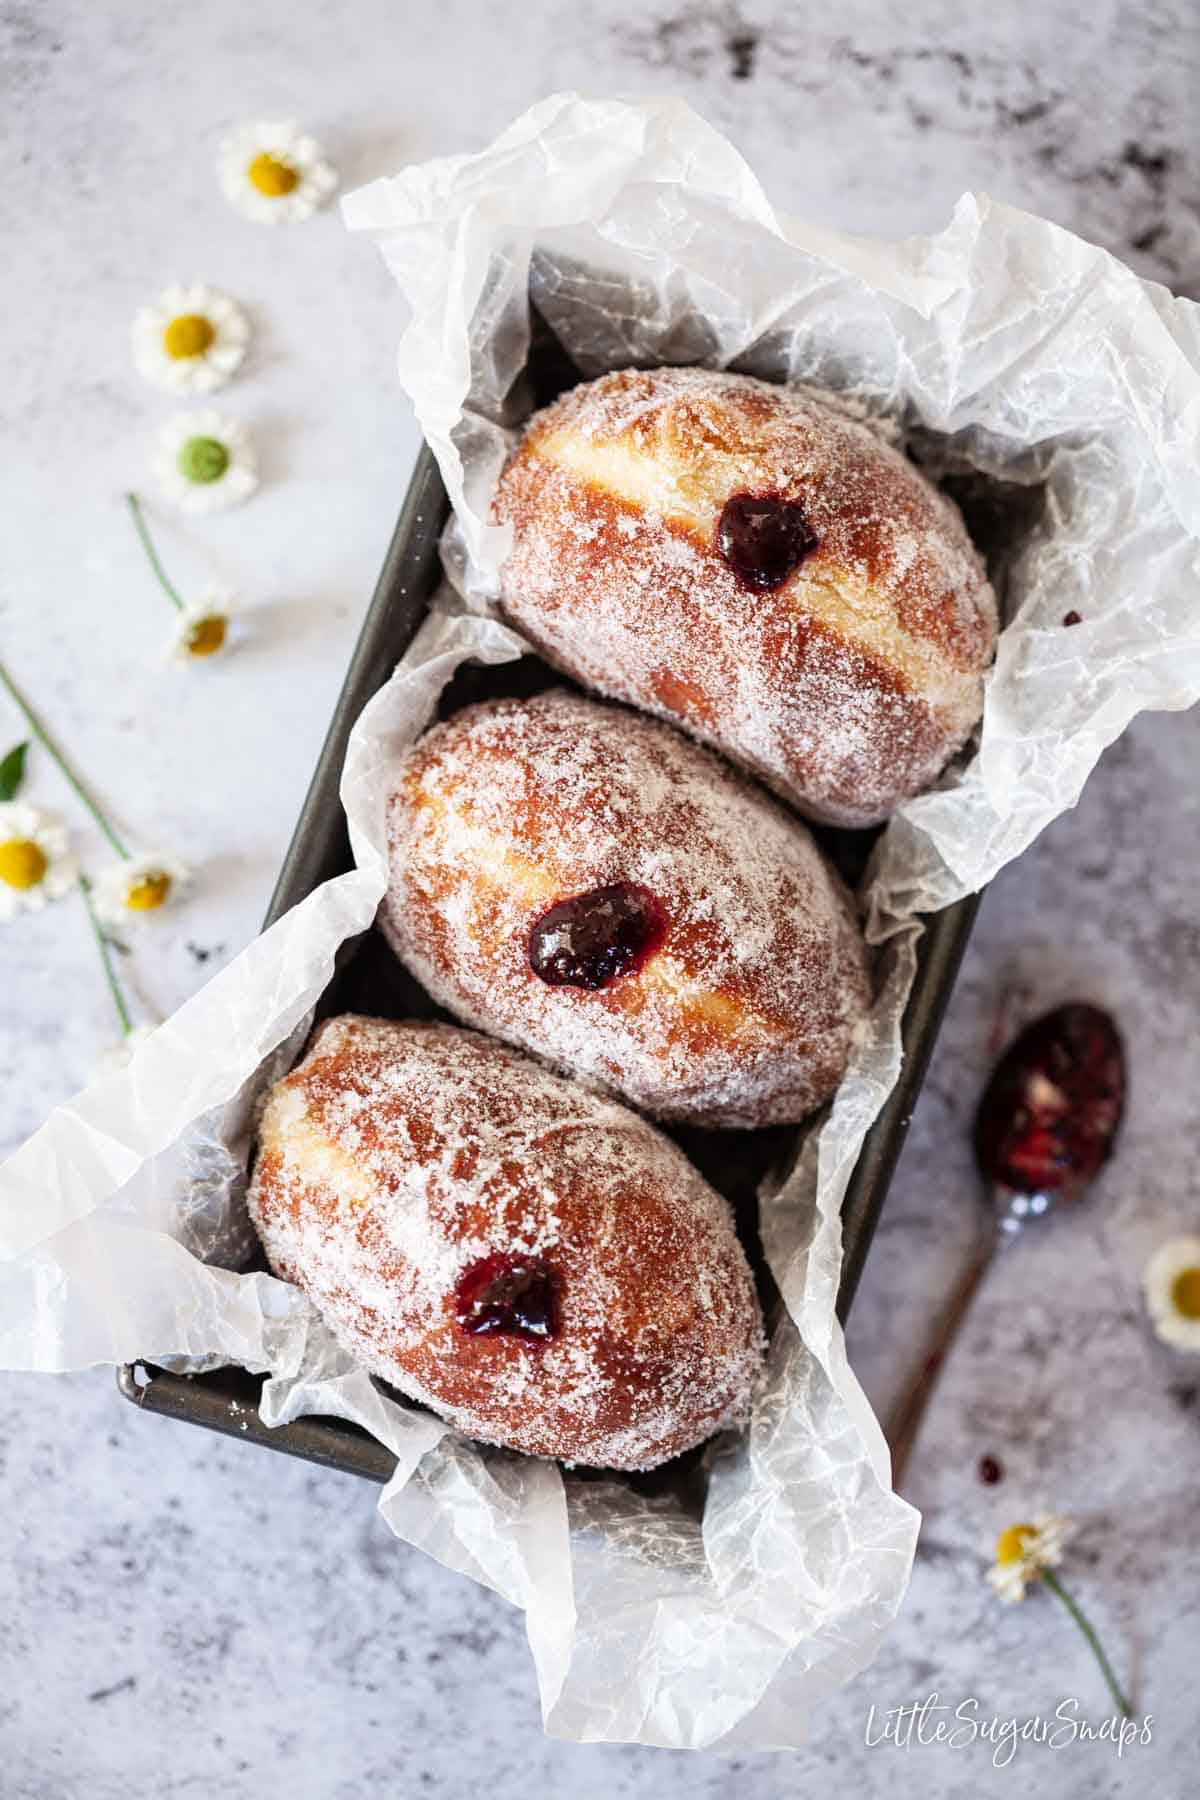 Three sugared doughnuts filled with jam in a baking tin